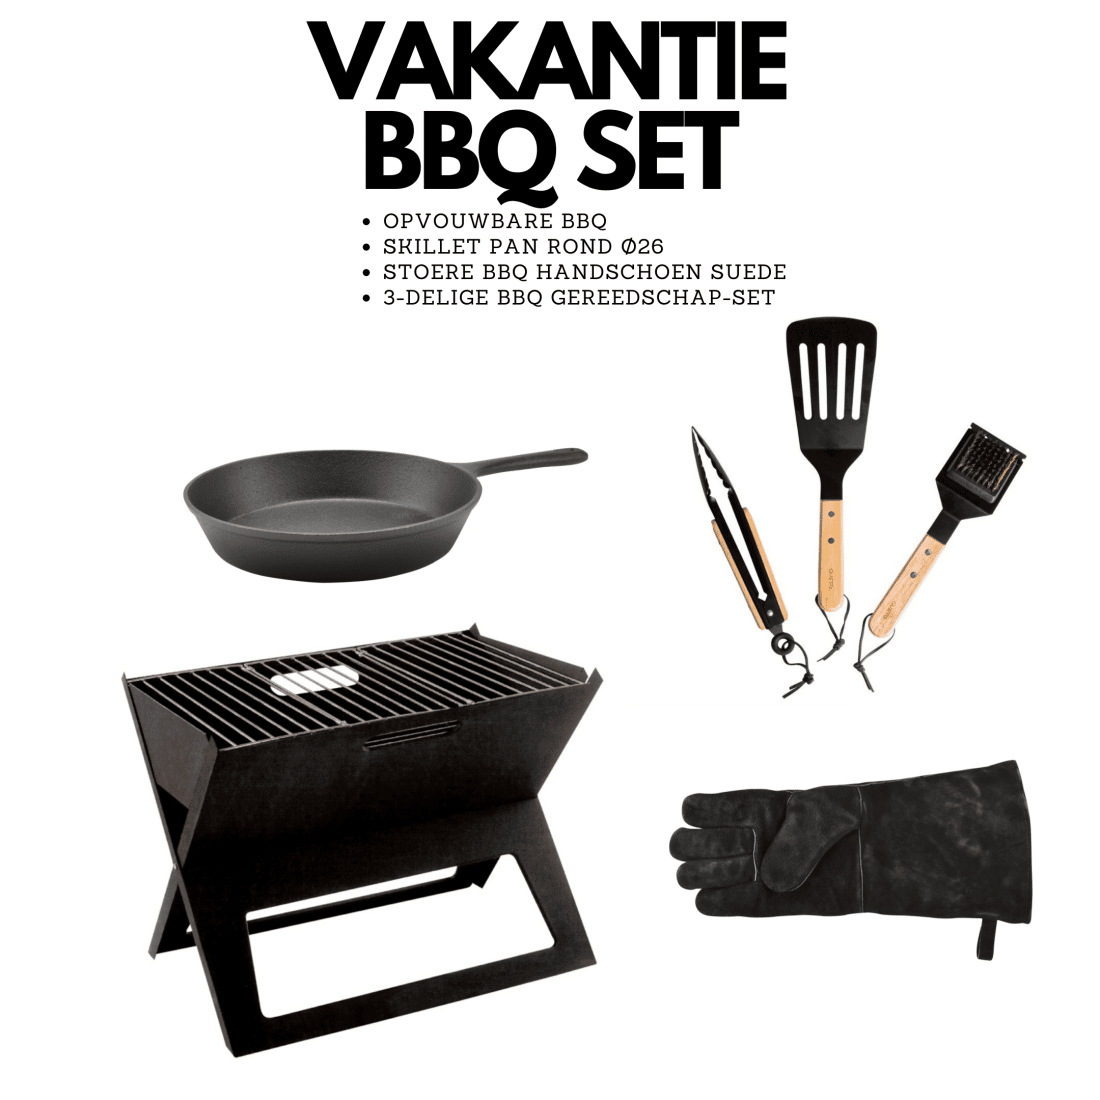 Order your Holiday BBQ set now